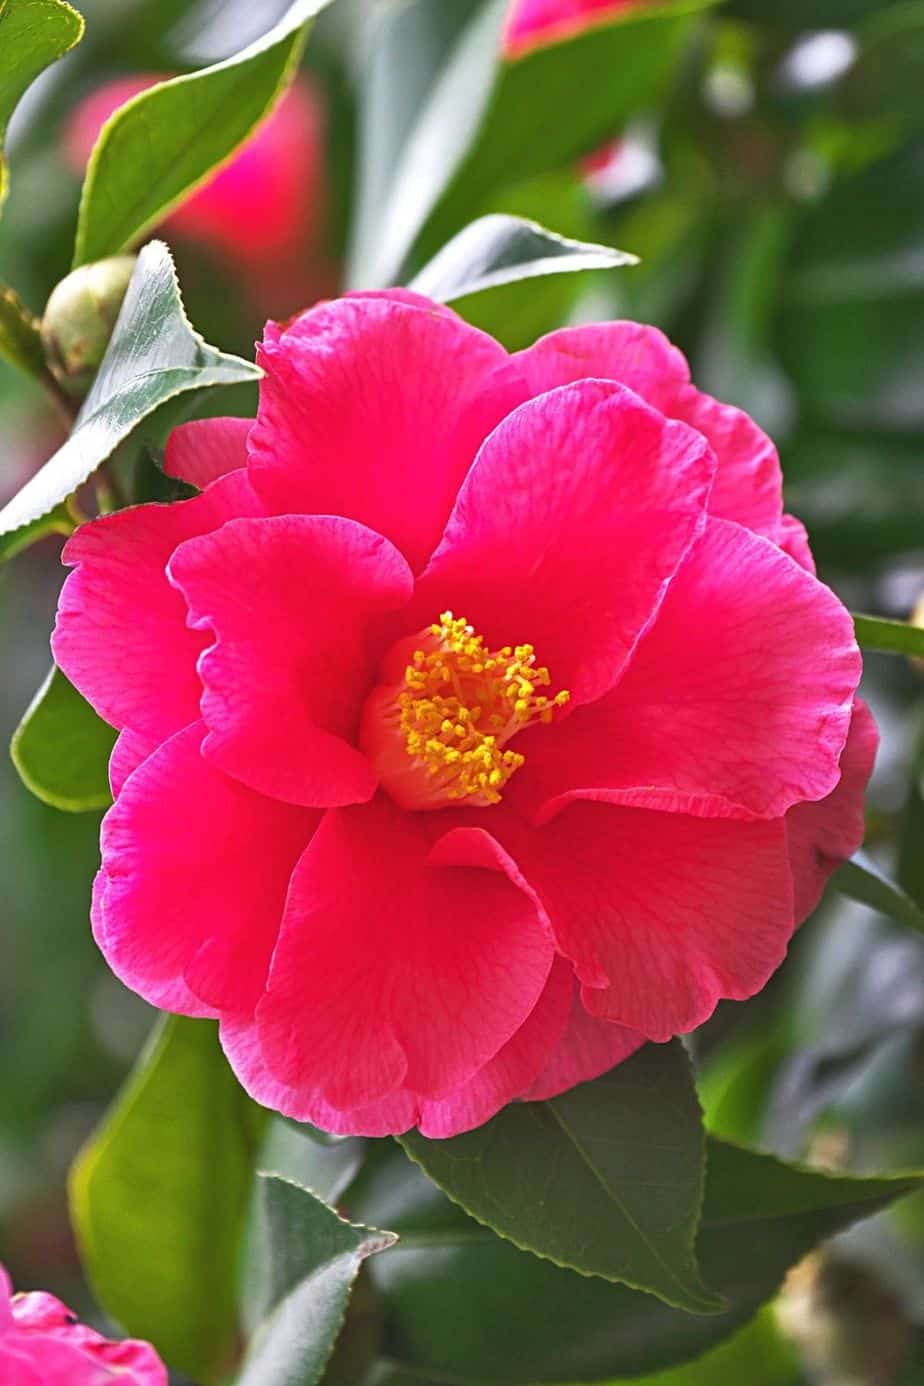 Camellia japonica loves growing in partial or full shade, which is what you can find in northwest-facing gardens